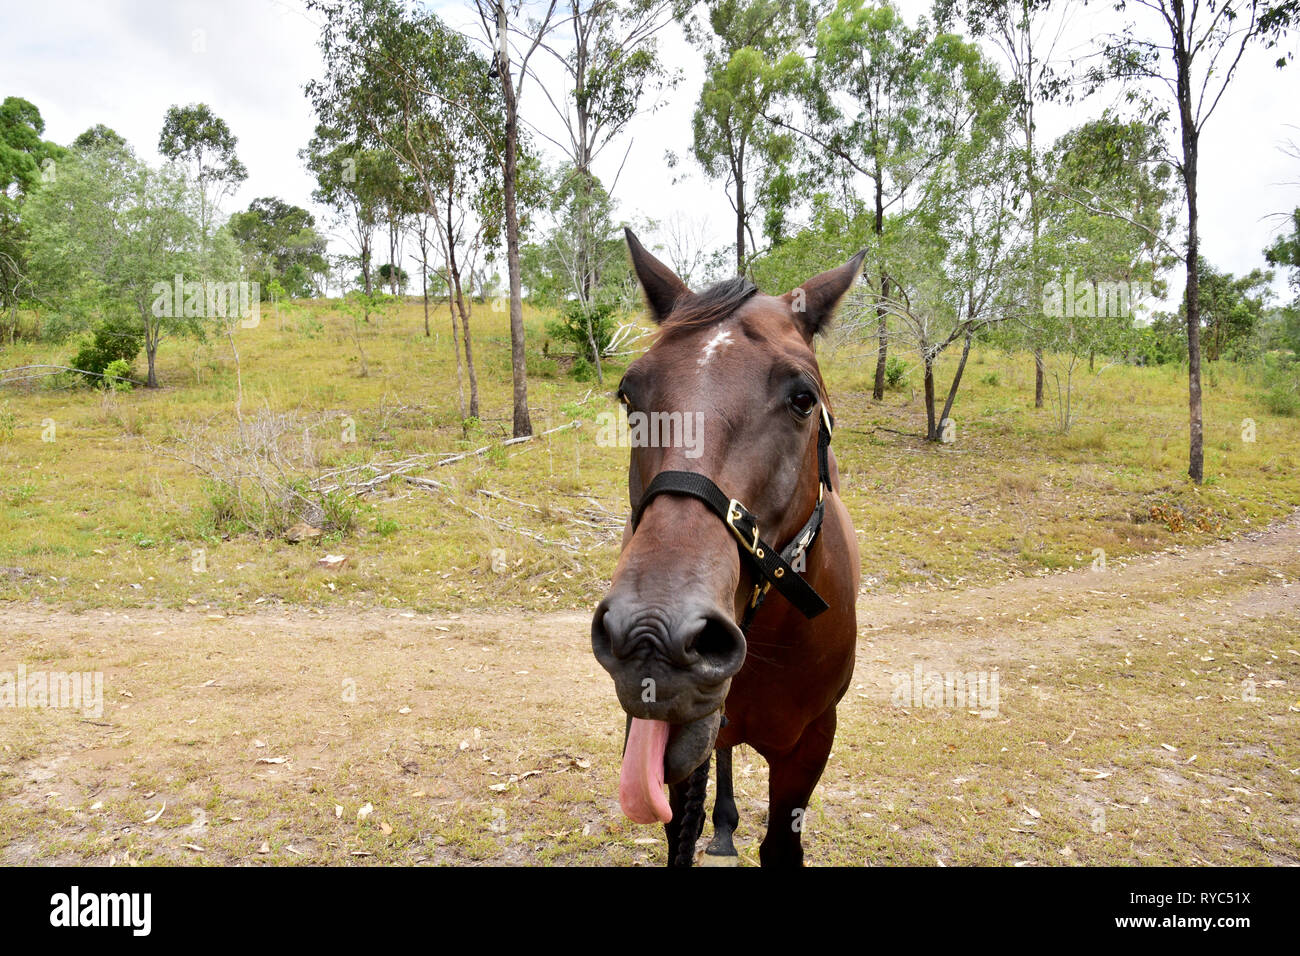 LAUGHING HORSE Stock Photo